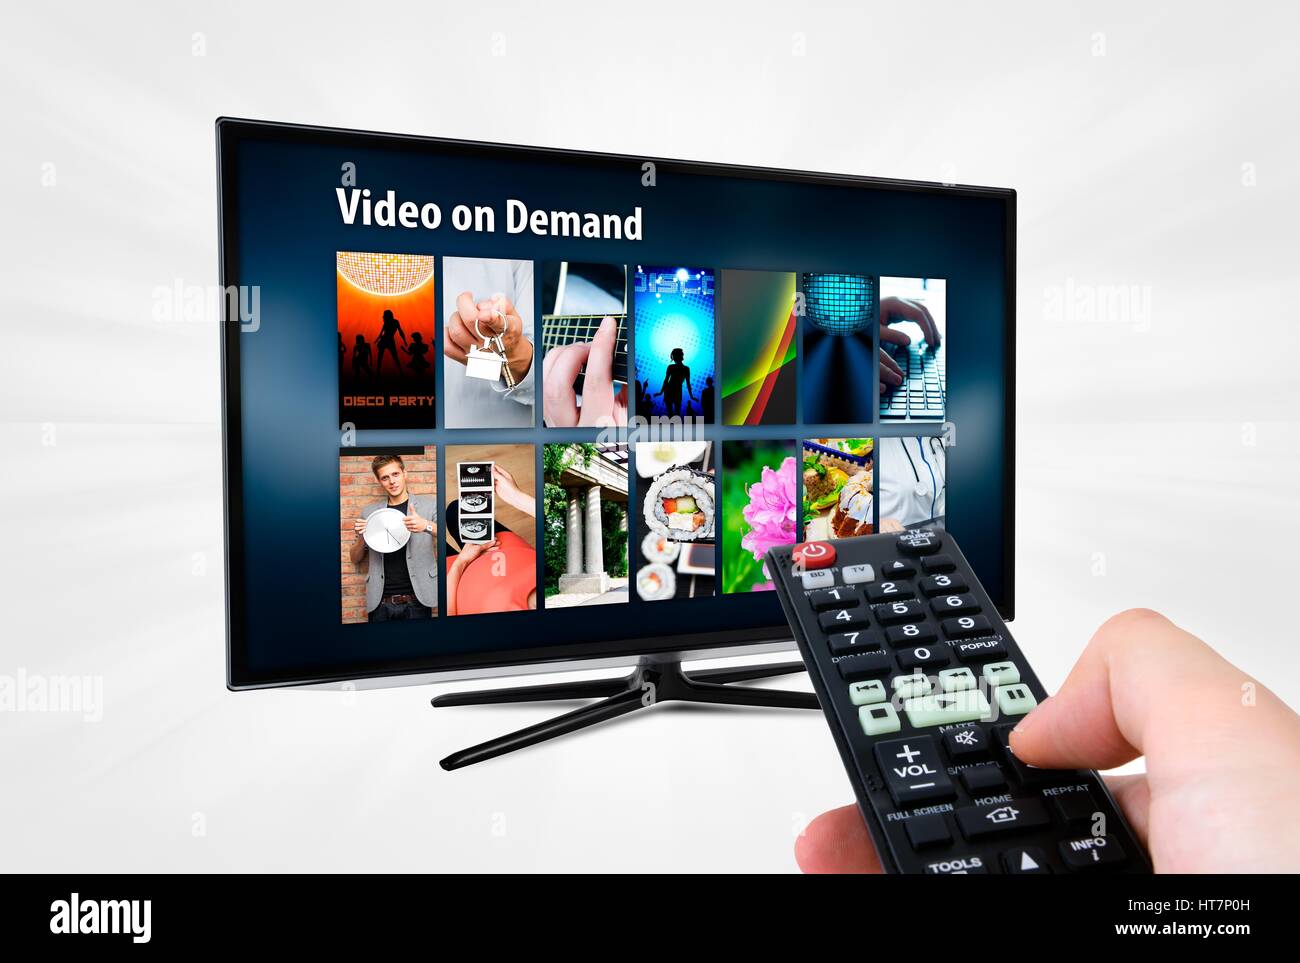 Video on demand VOD service on smart TV. Remote control in hand. Stock Photo